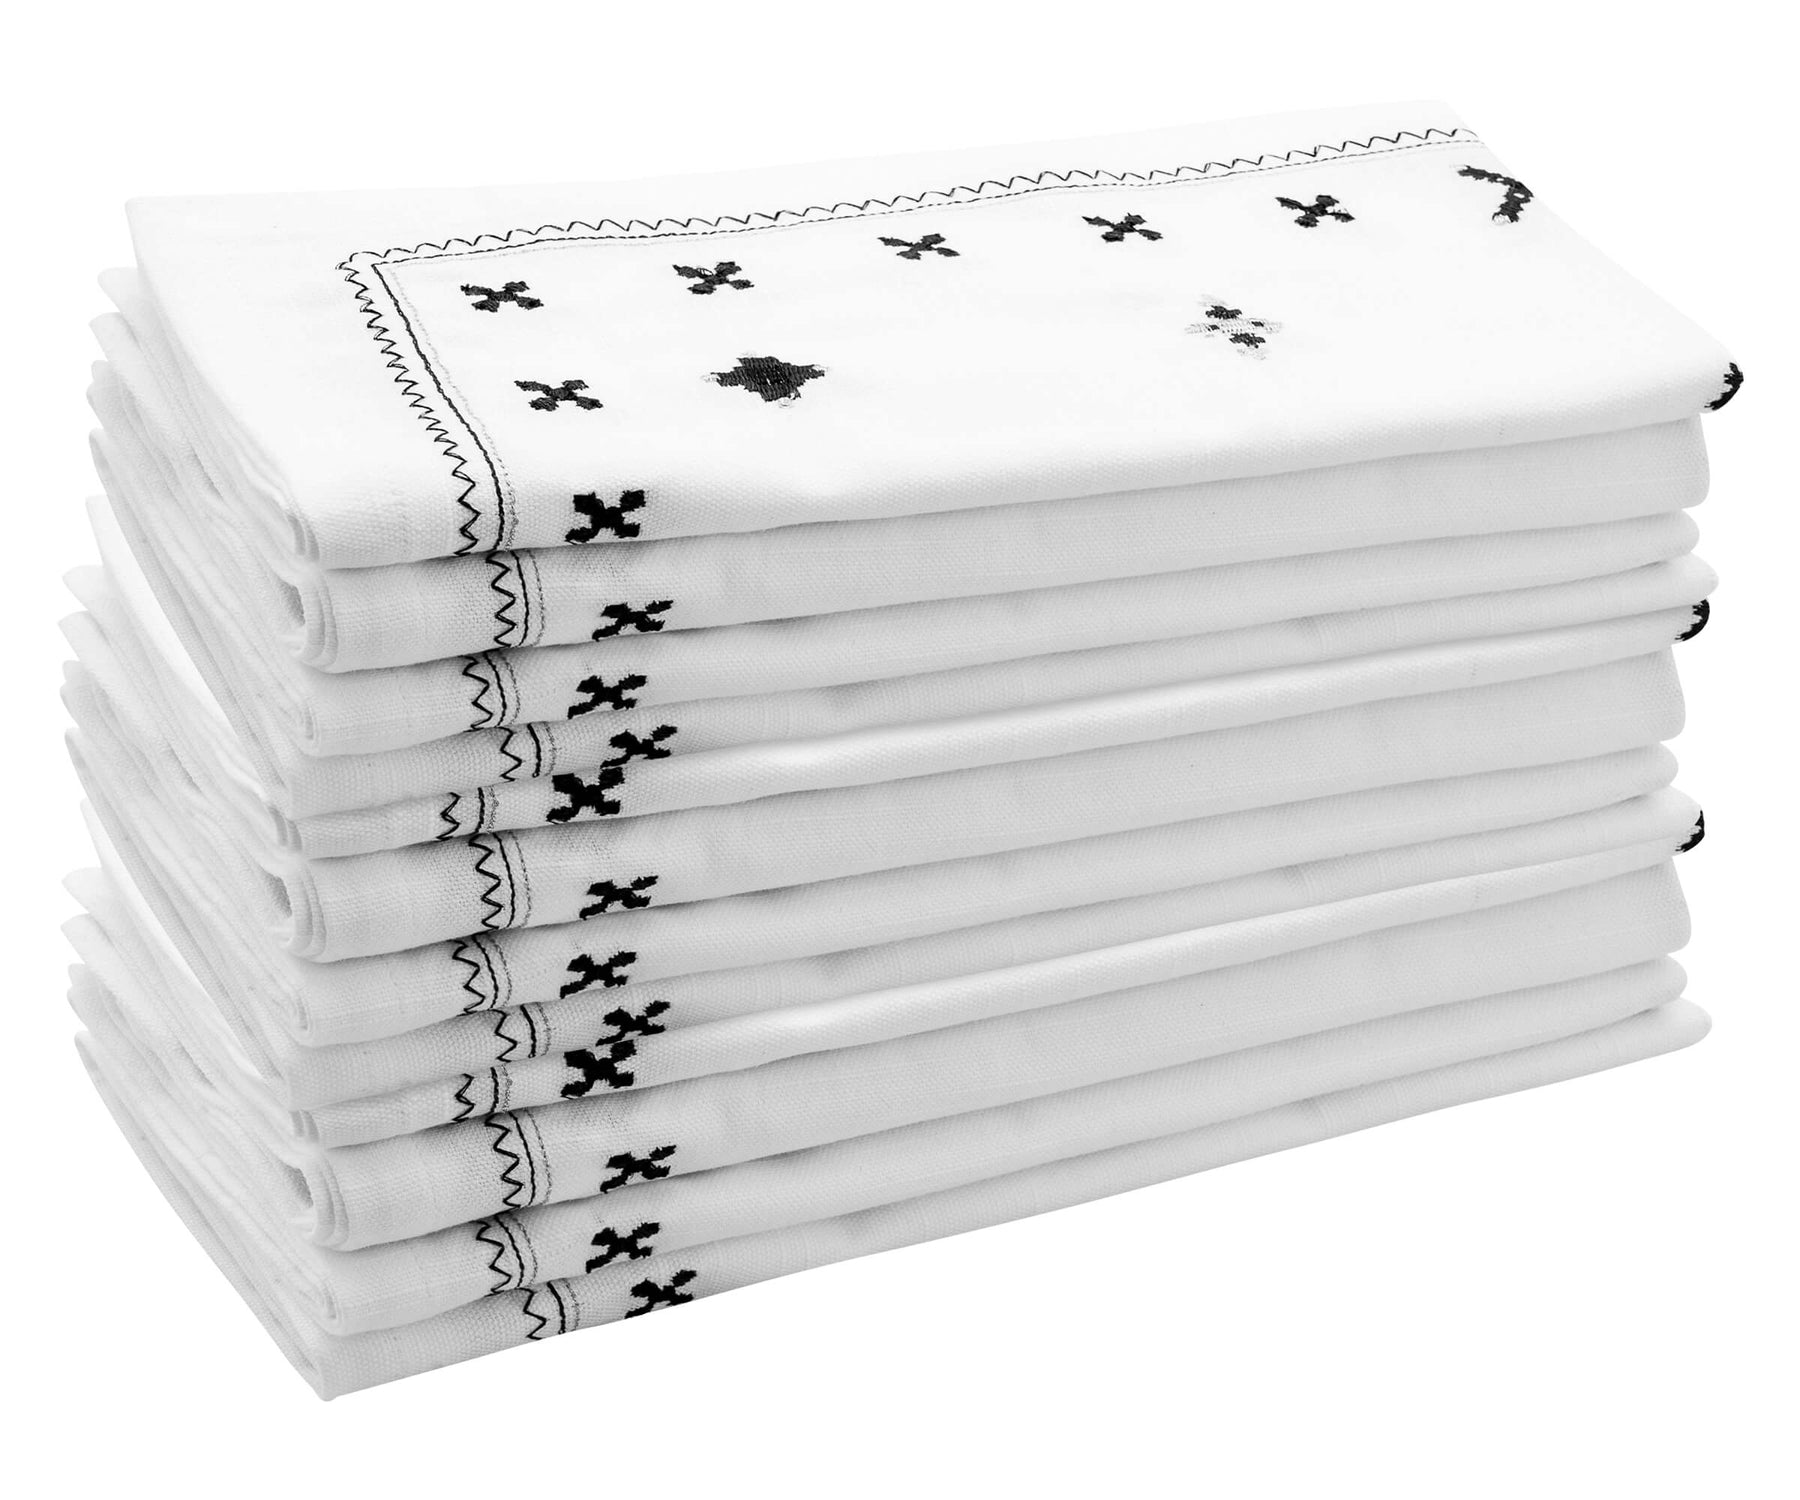 White napkins Durable white napkins resist tearing or ripping, even when subjected to heavy use.